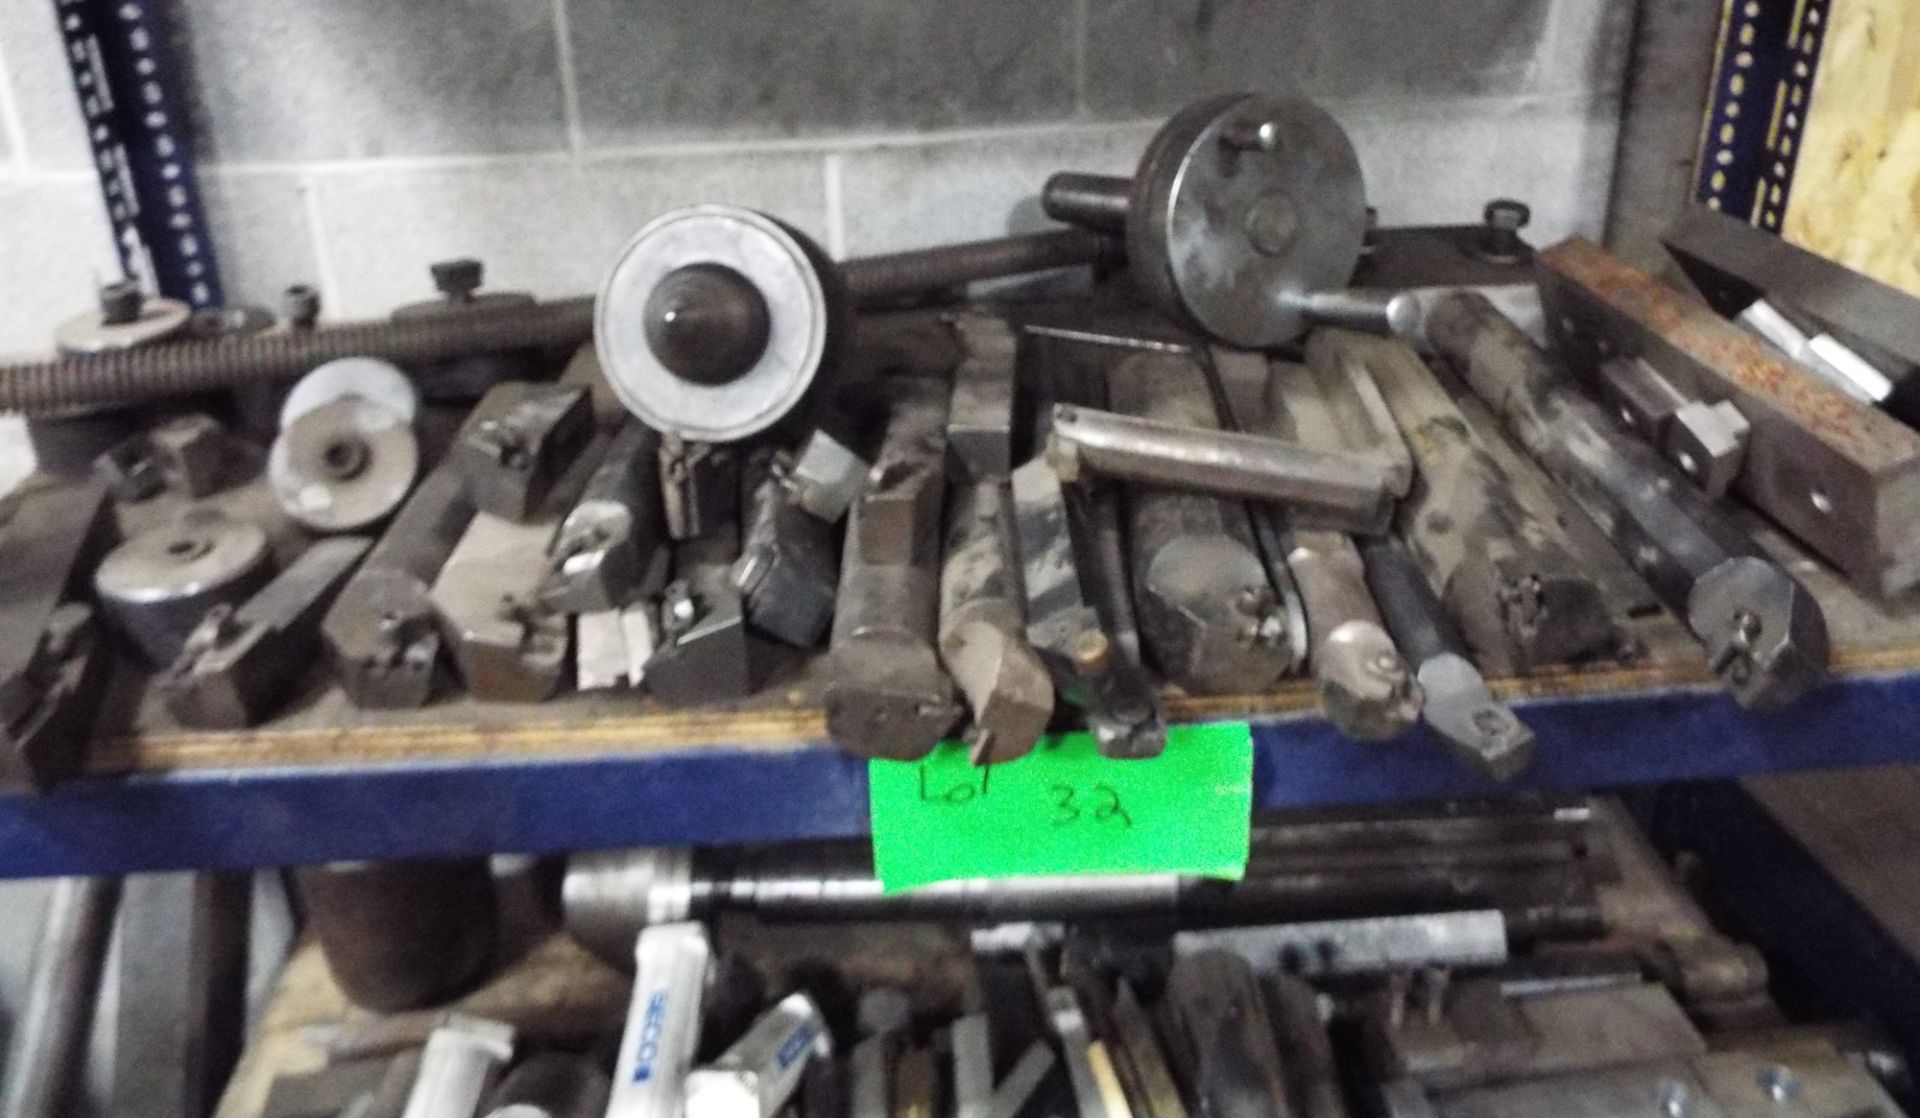 LOT/ SIRCO TOOLING INCLUDING BORING BARS, CENTERS AND REAMERS, S/N: N/A - Image 2 of 6